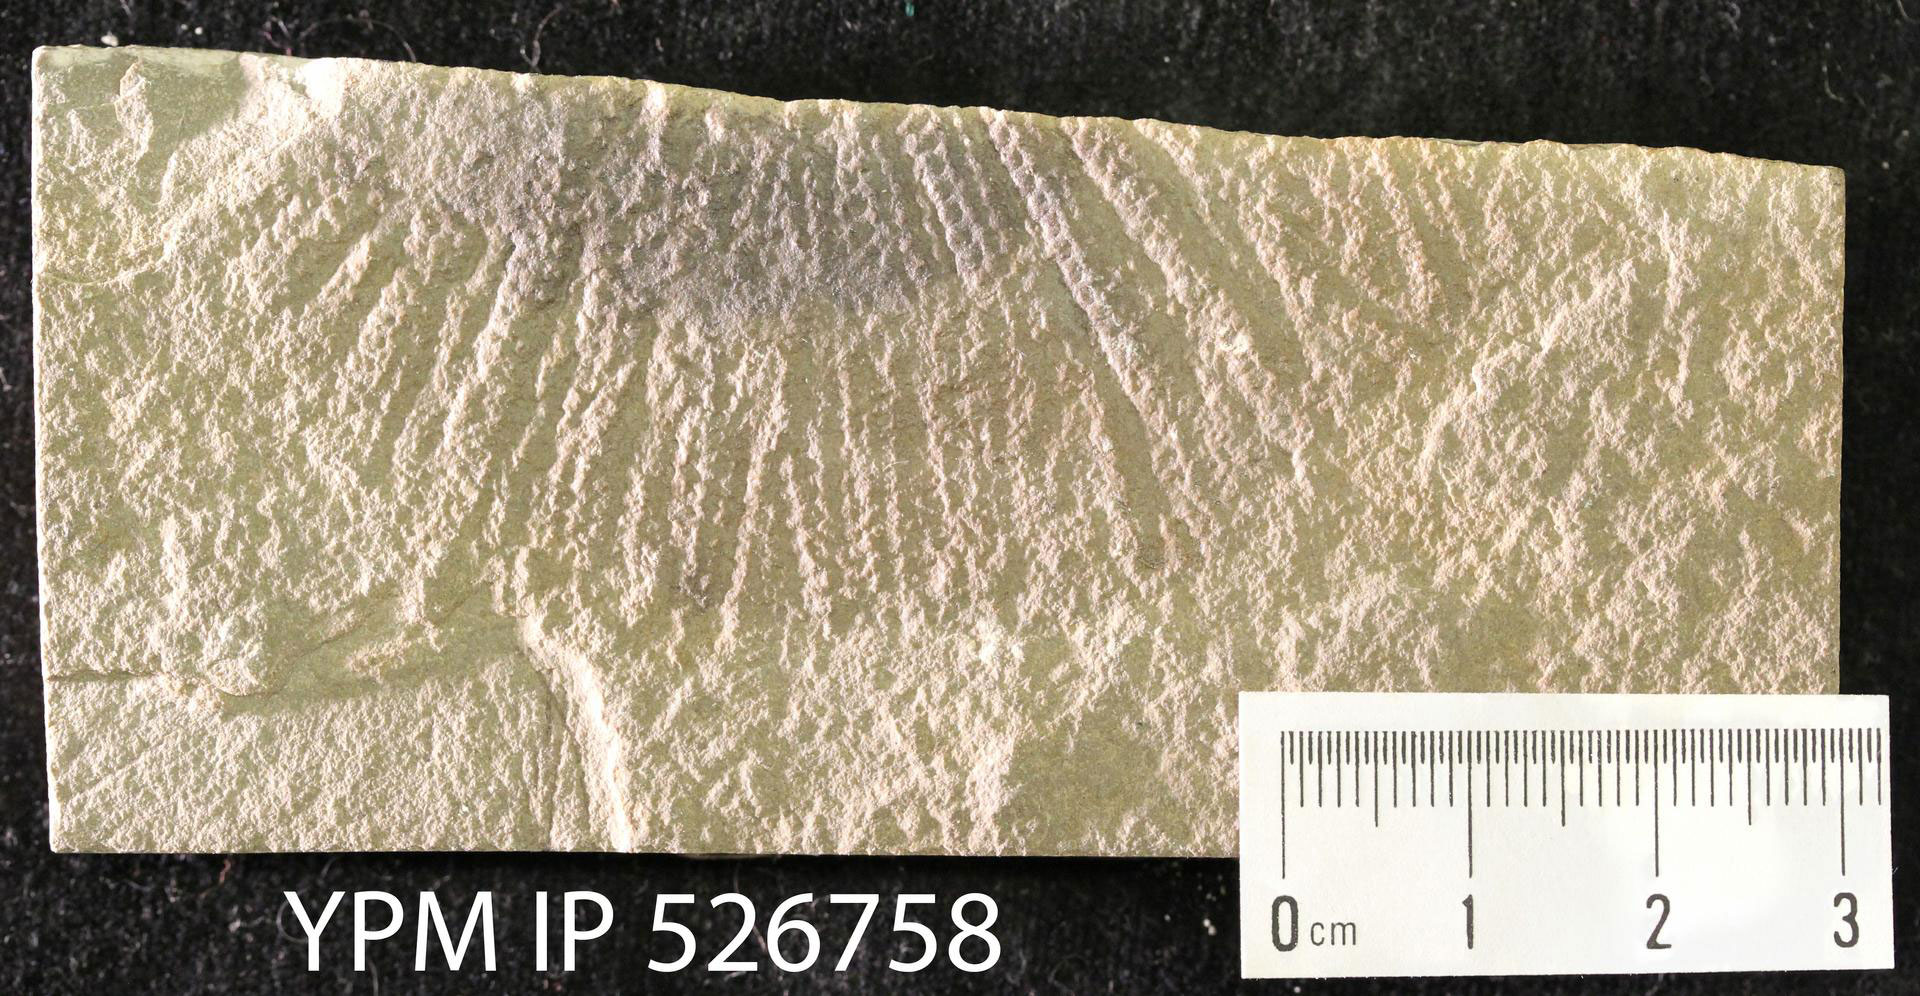 Photograph of Lepidastrella, a Cambrian echinoderm from the Mississippian Bear Gulch fauna of Montana. The photo shows a tan rock with an impression of part of a radially symmetrical animal with multiple radiating arms. Scale bar is 3 centimeters.